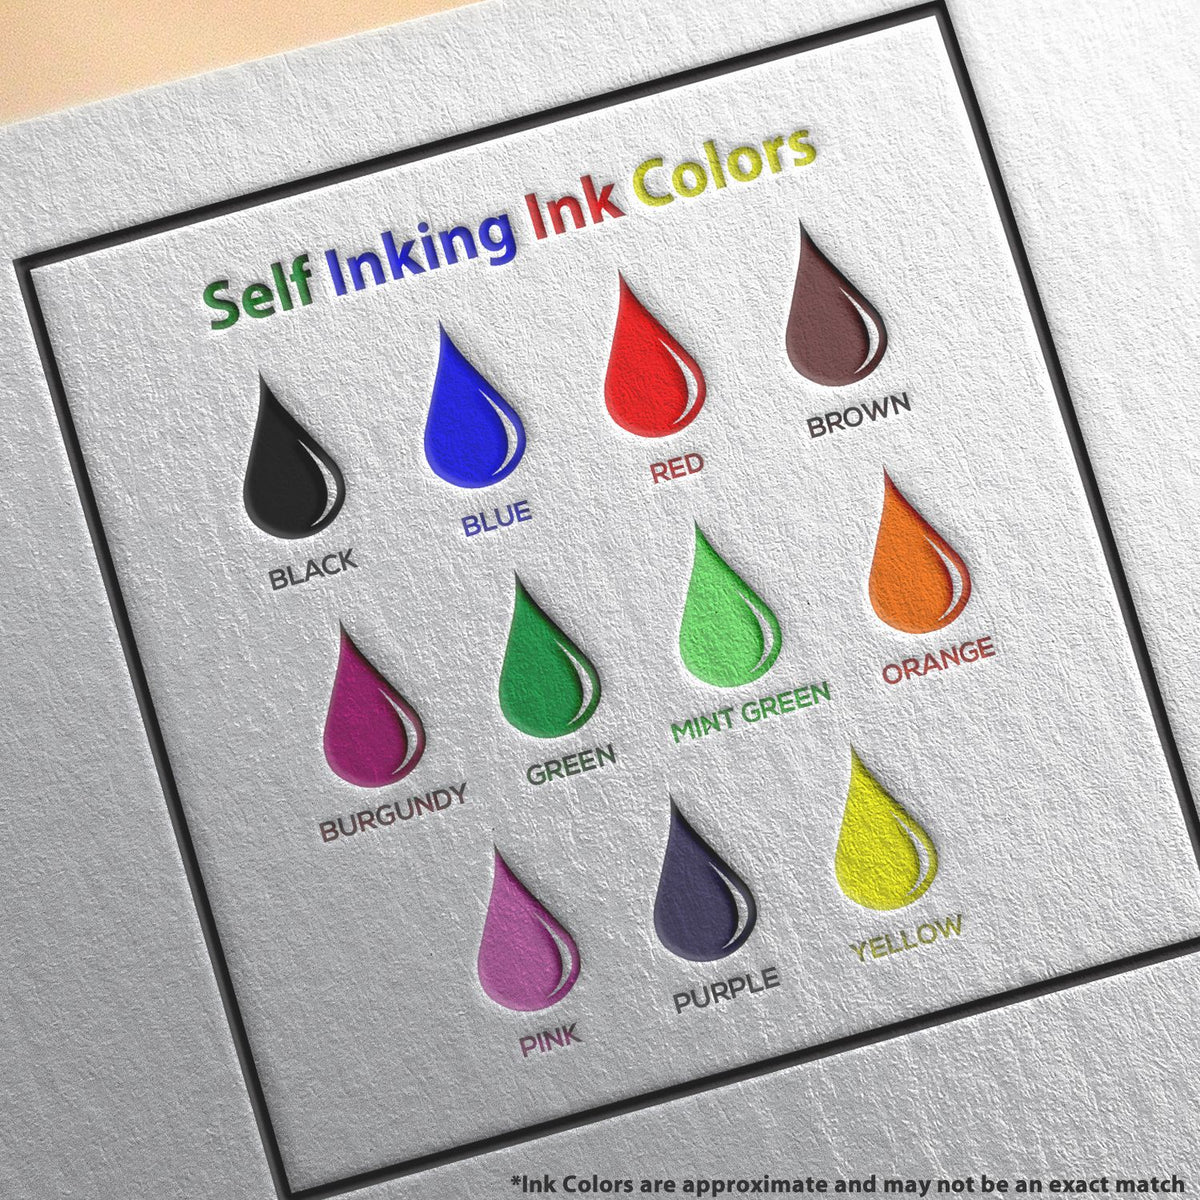 A picture showing the different ink colors or hues available for the Self-Inking South Carolina Geologist Stamp